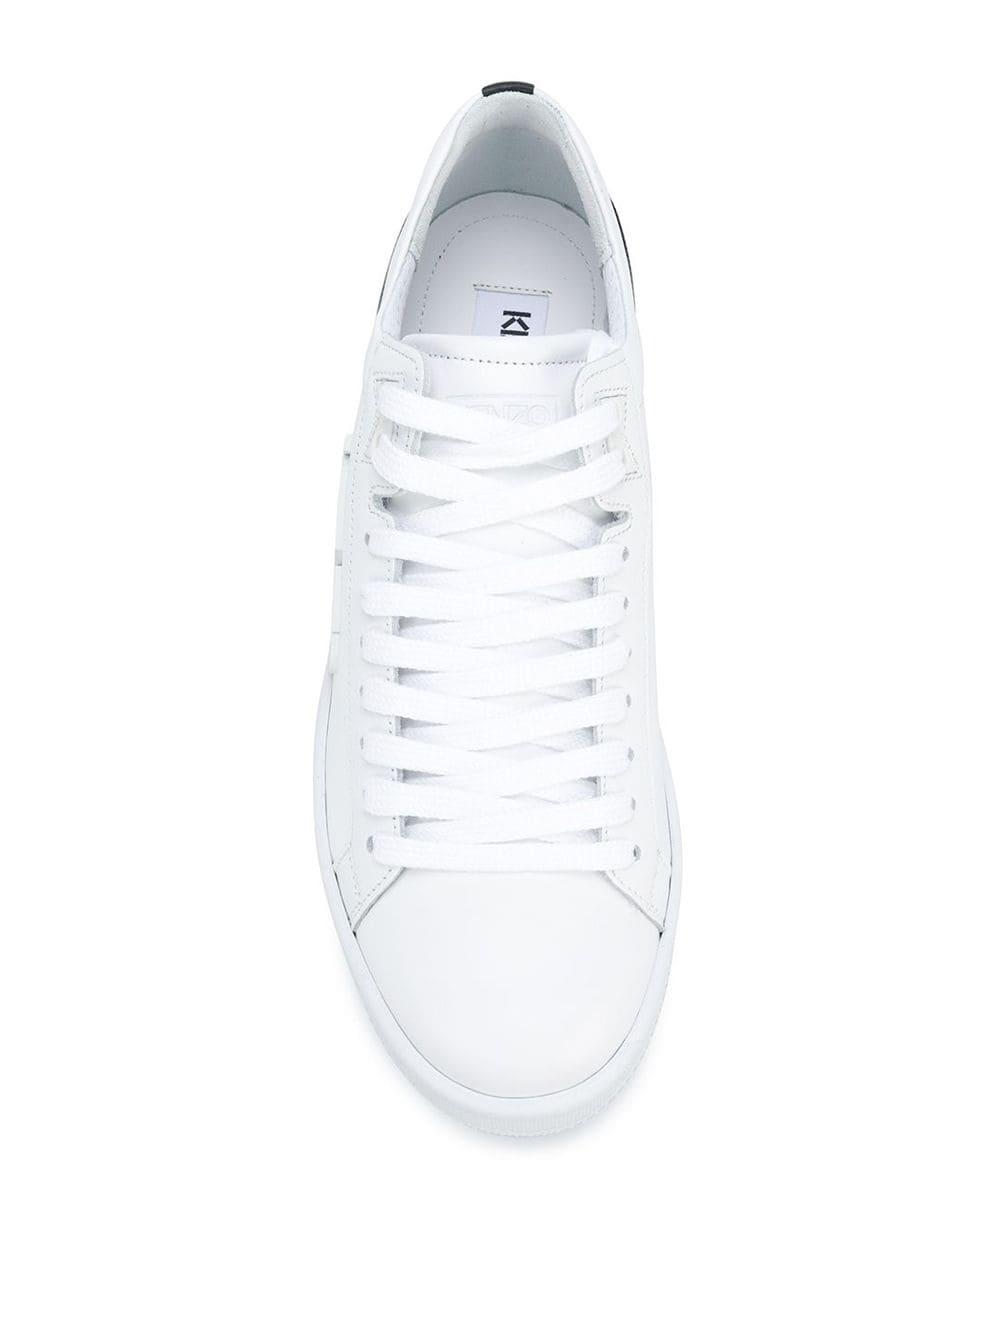 KENZO Leather Tennix Sneakers in White for Men - Lyst